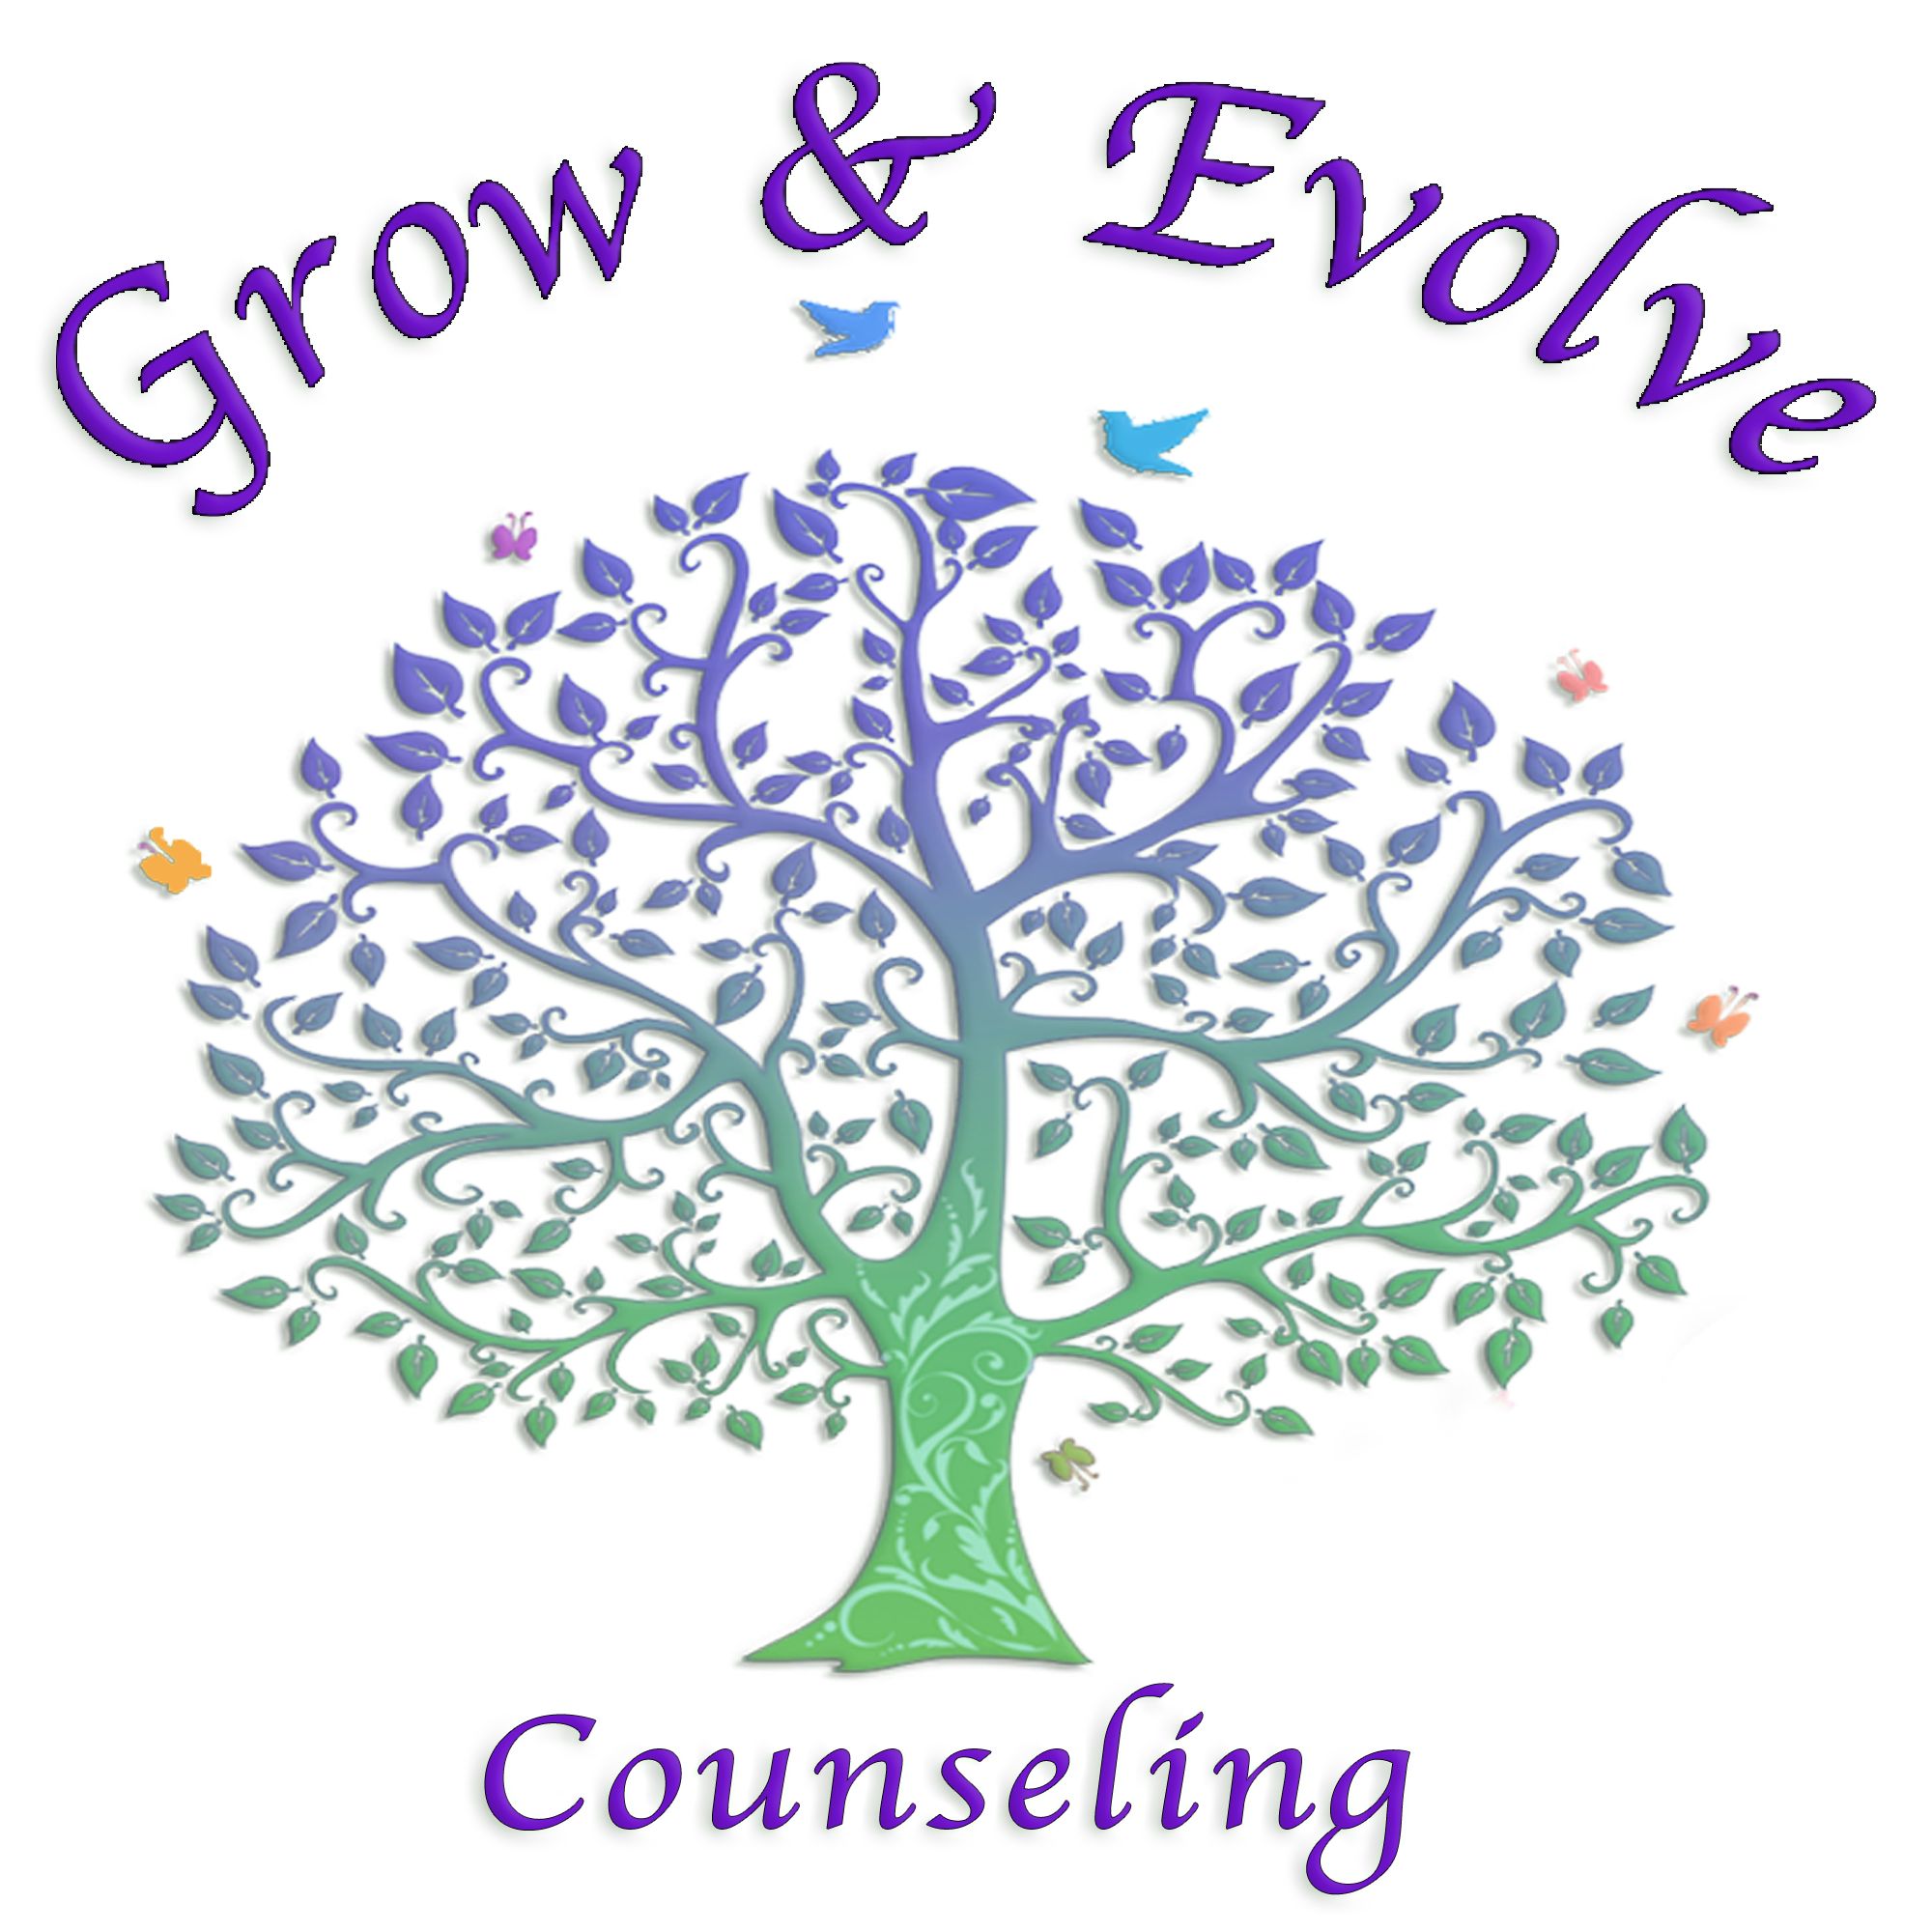 Grow & Evolve Counseling